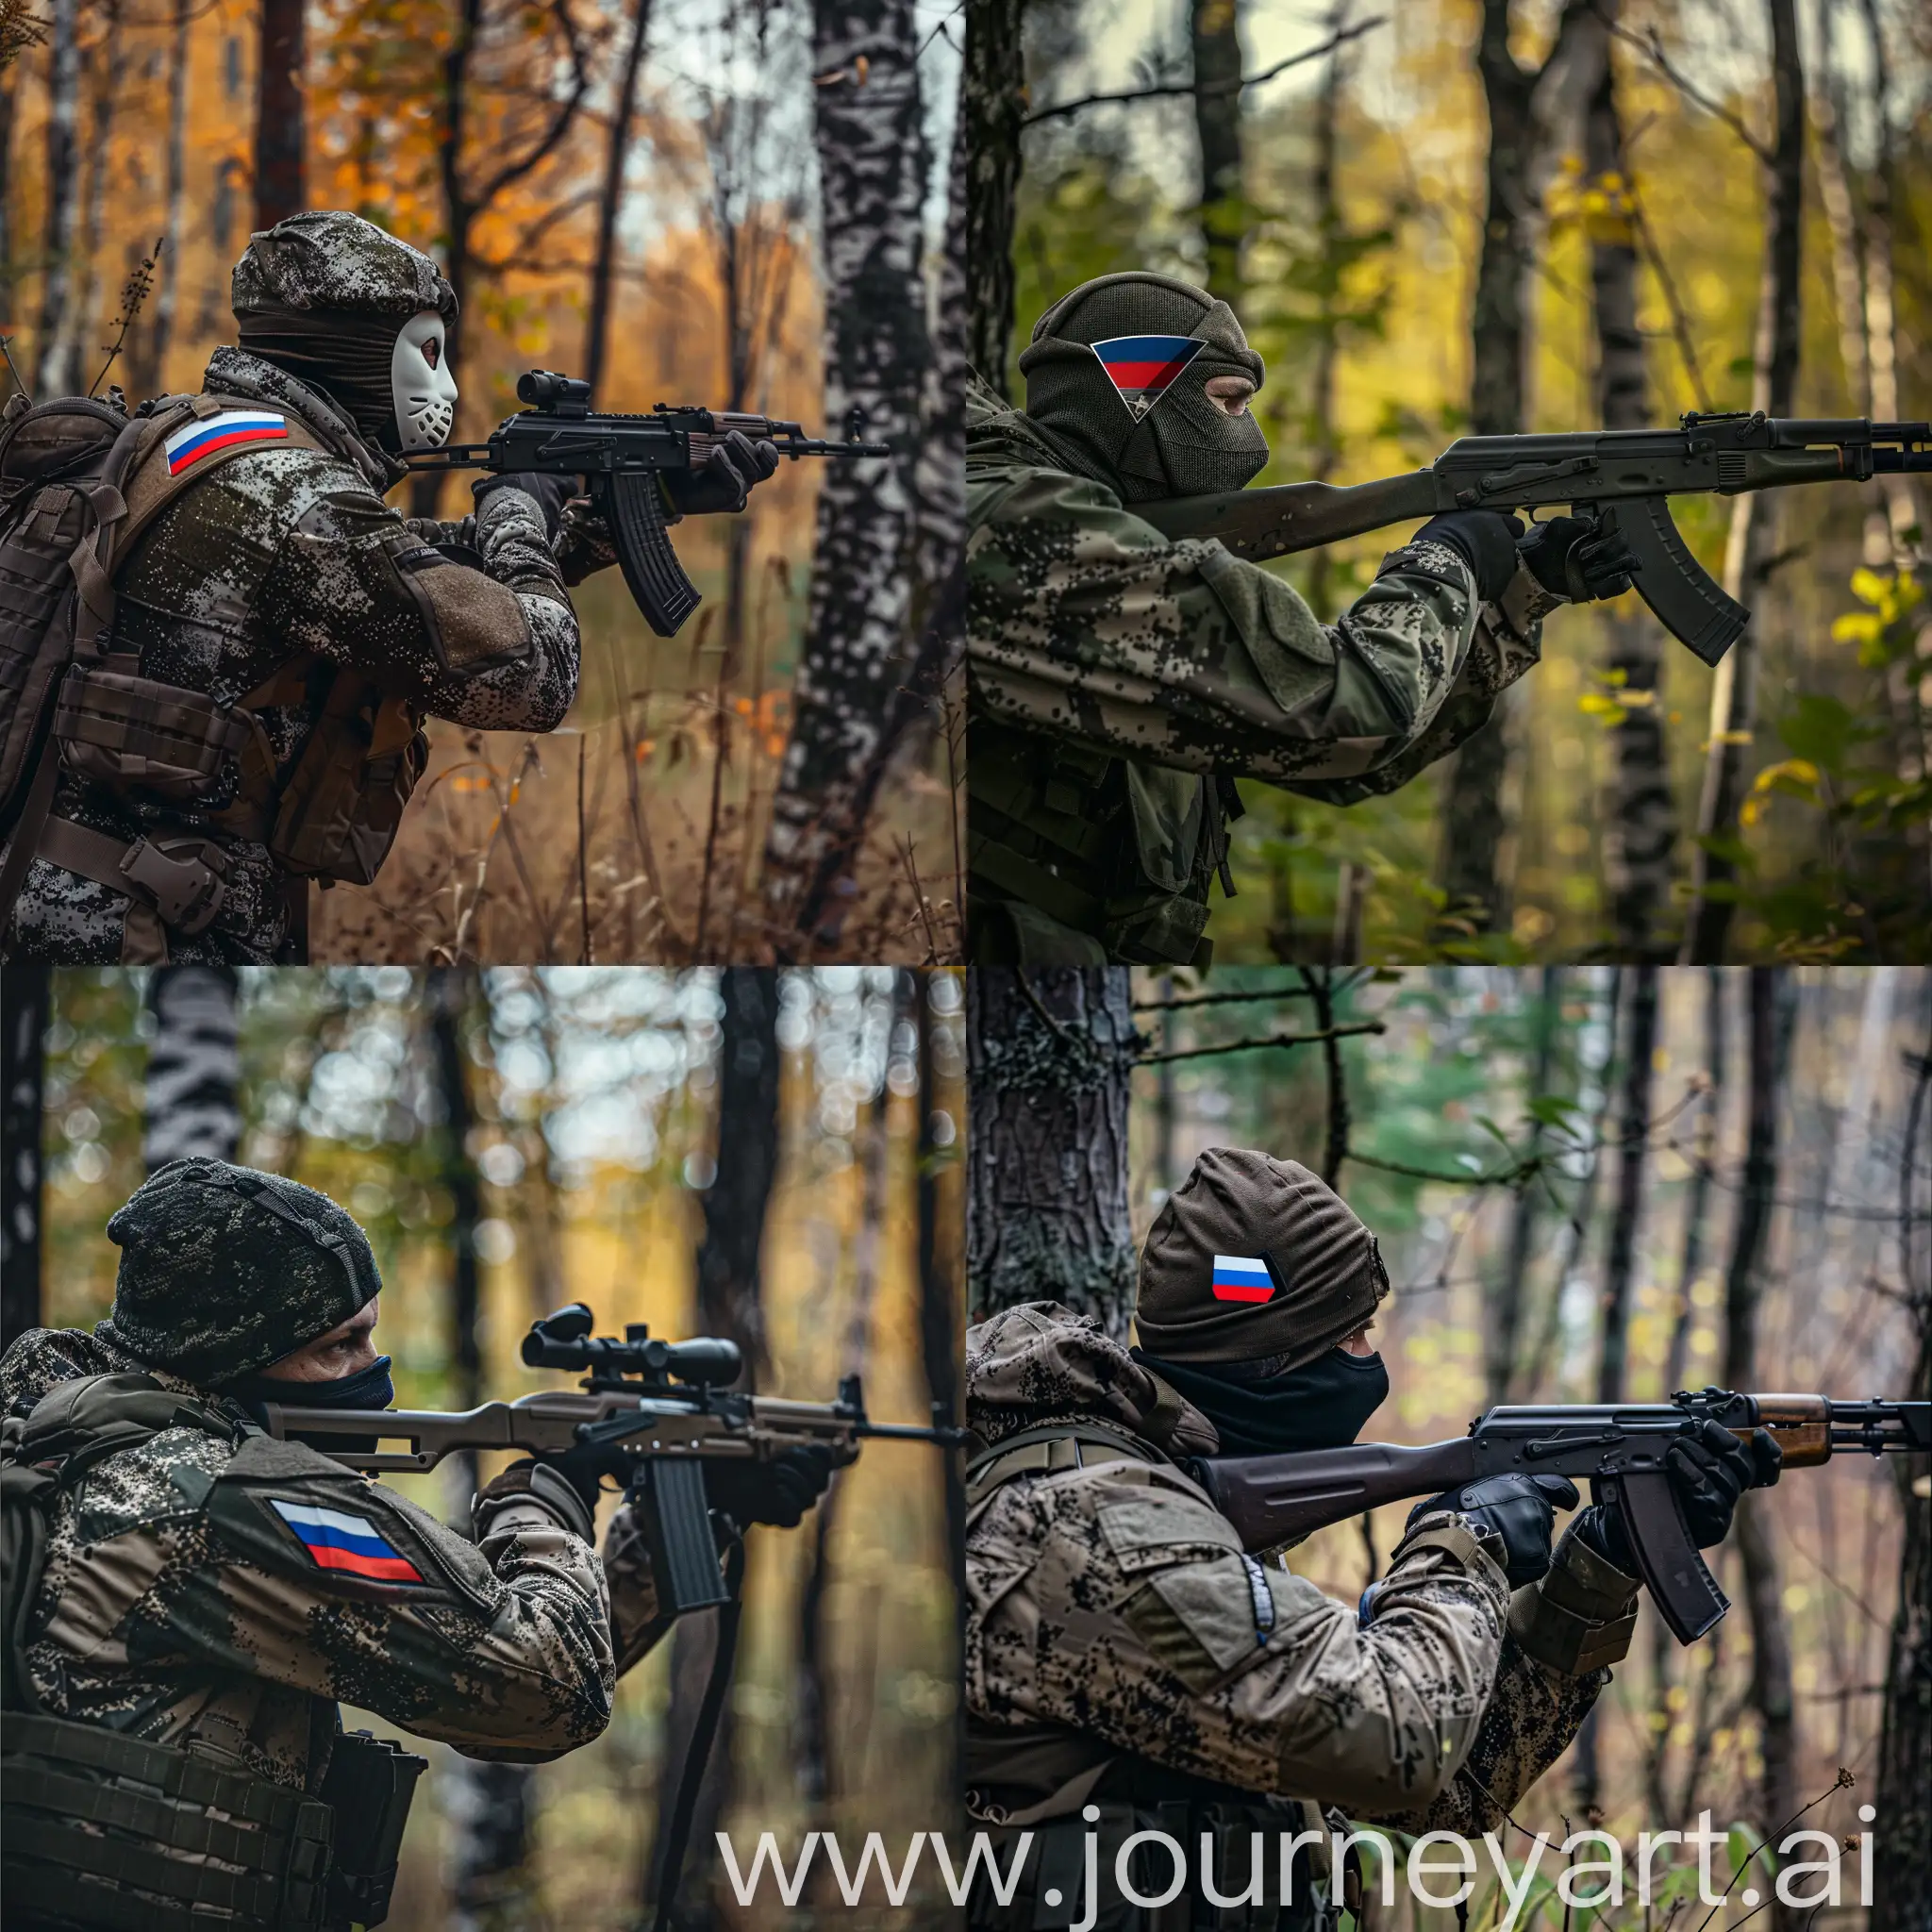 A man in an anonymous mask and camouflage uniform with a chevron of the Russian flag on his shoulder, aiming a hunting rifle in the forest